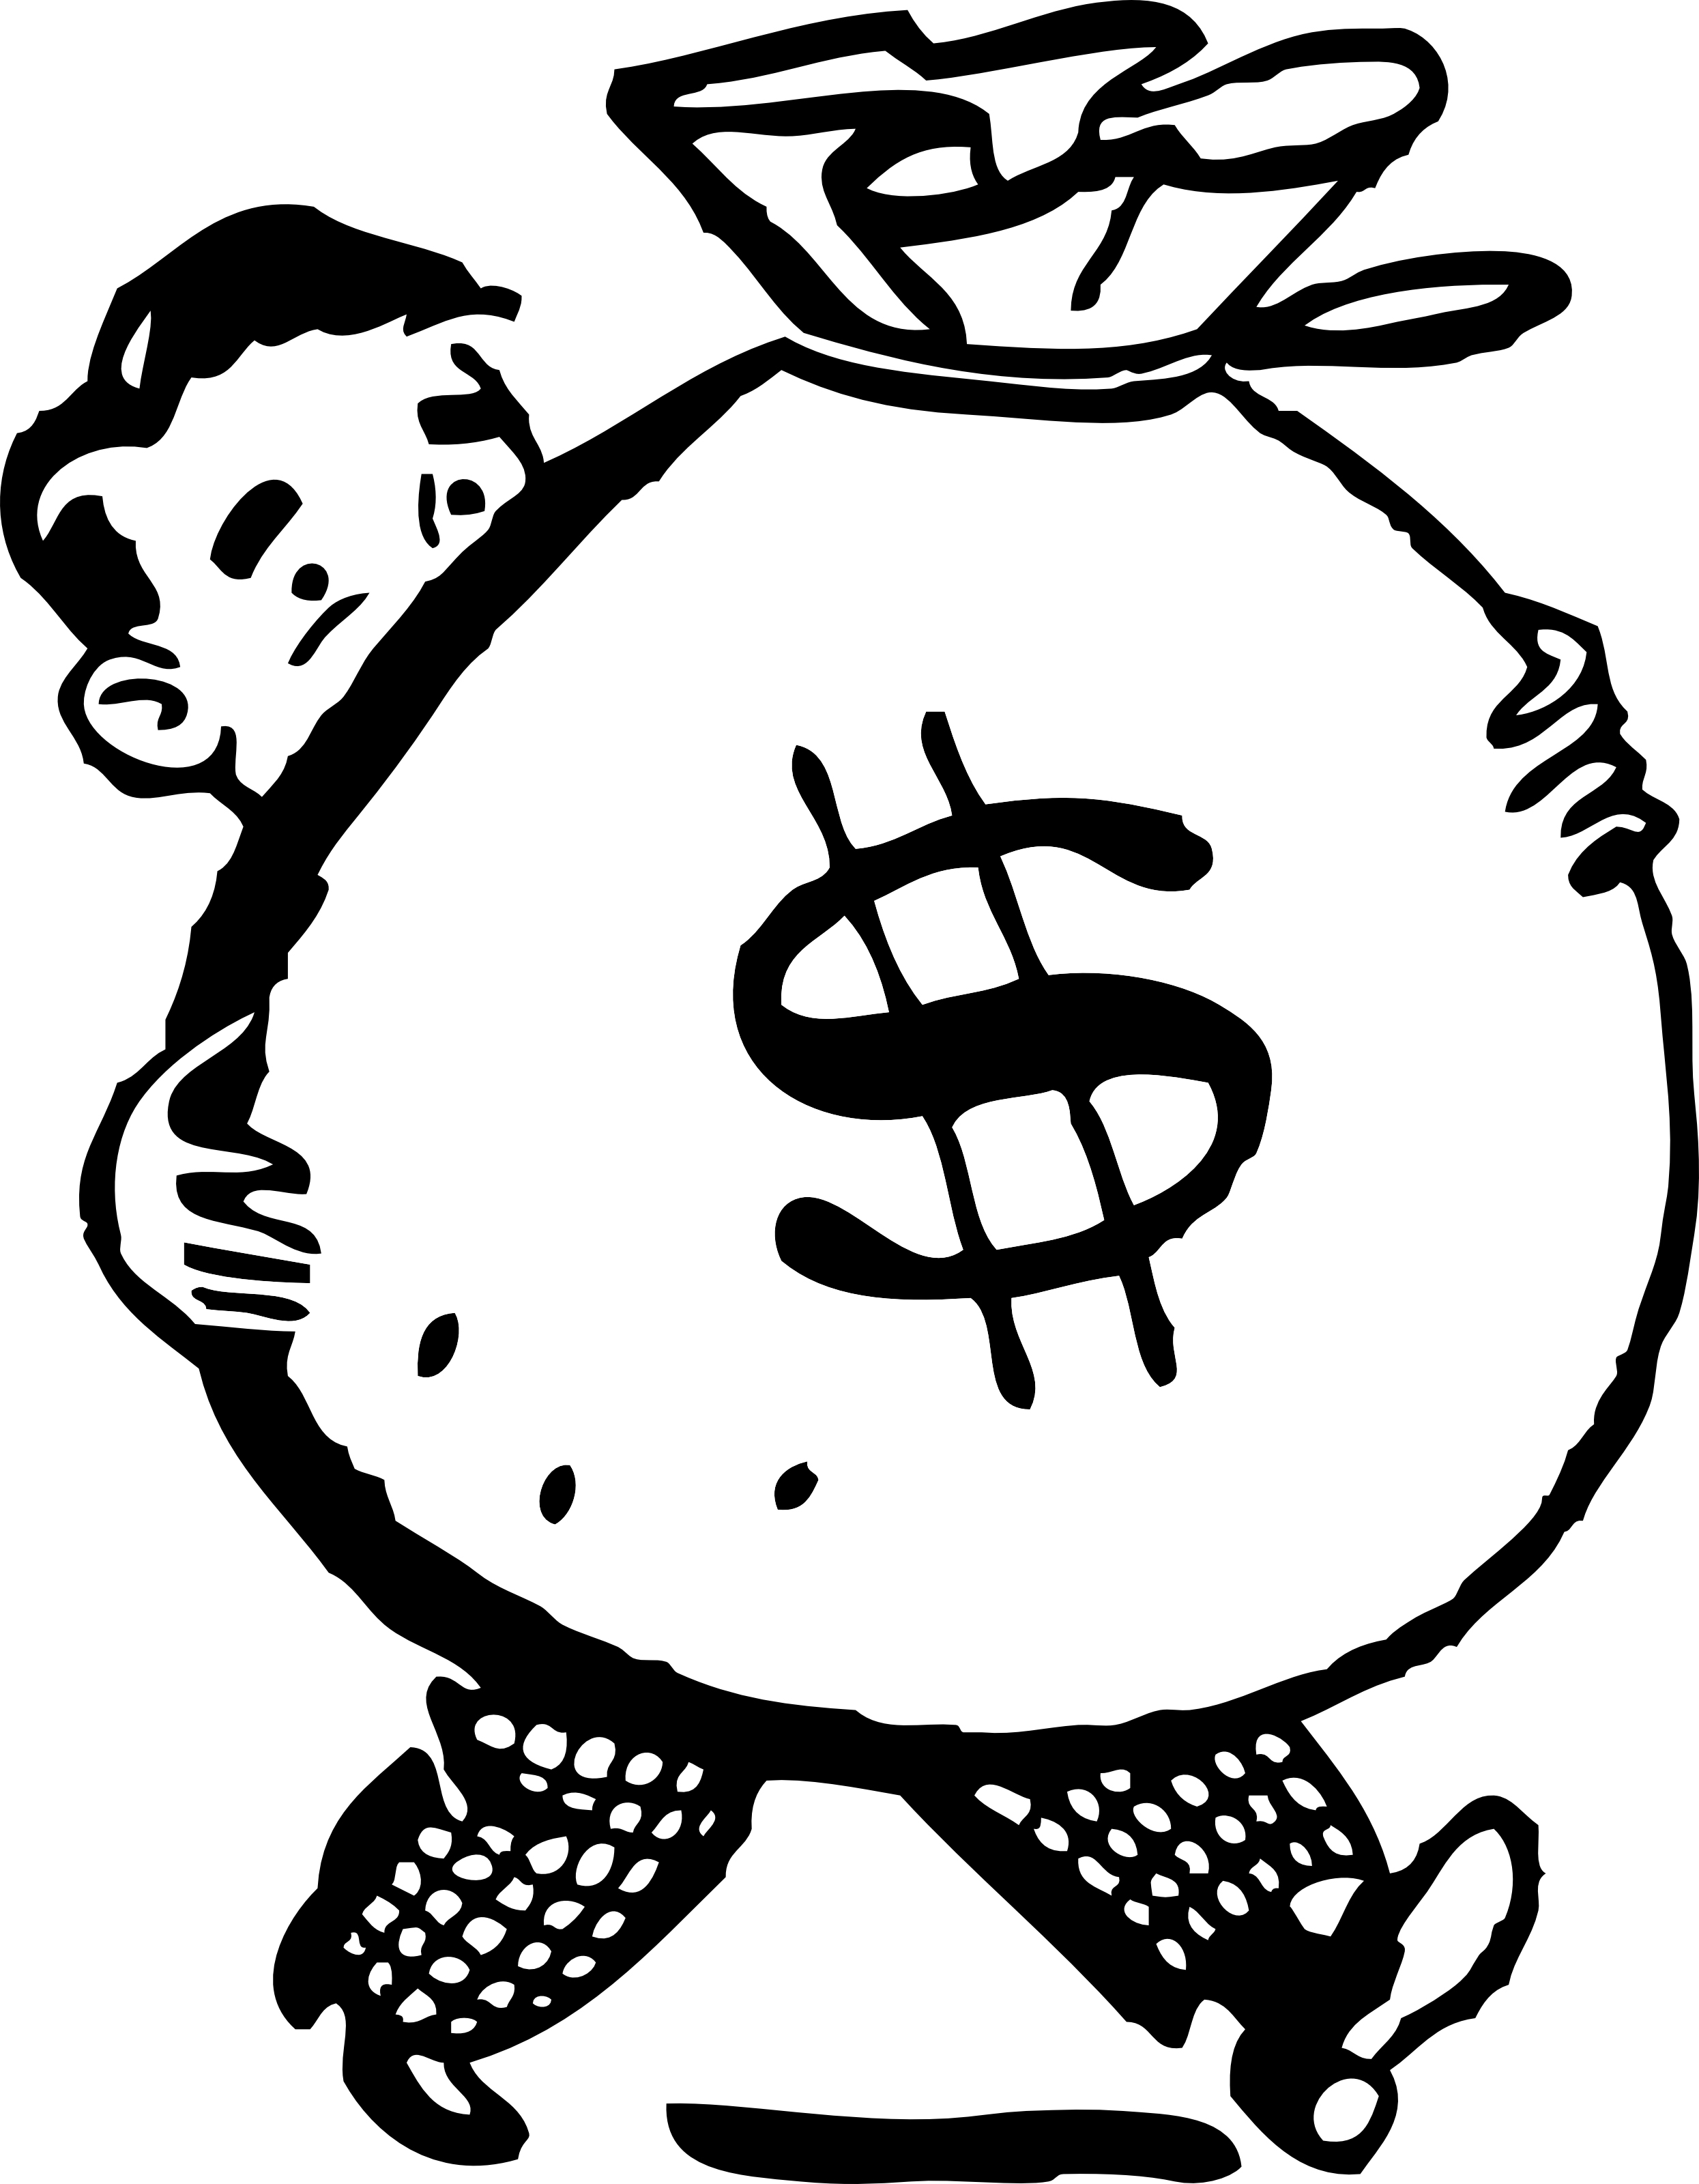 Dollar Sign Clipart Black And White   Clipart Panda   Free Clipart